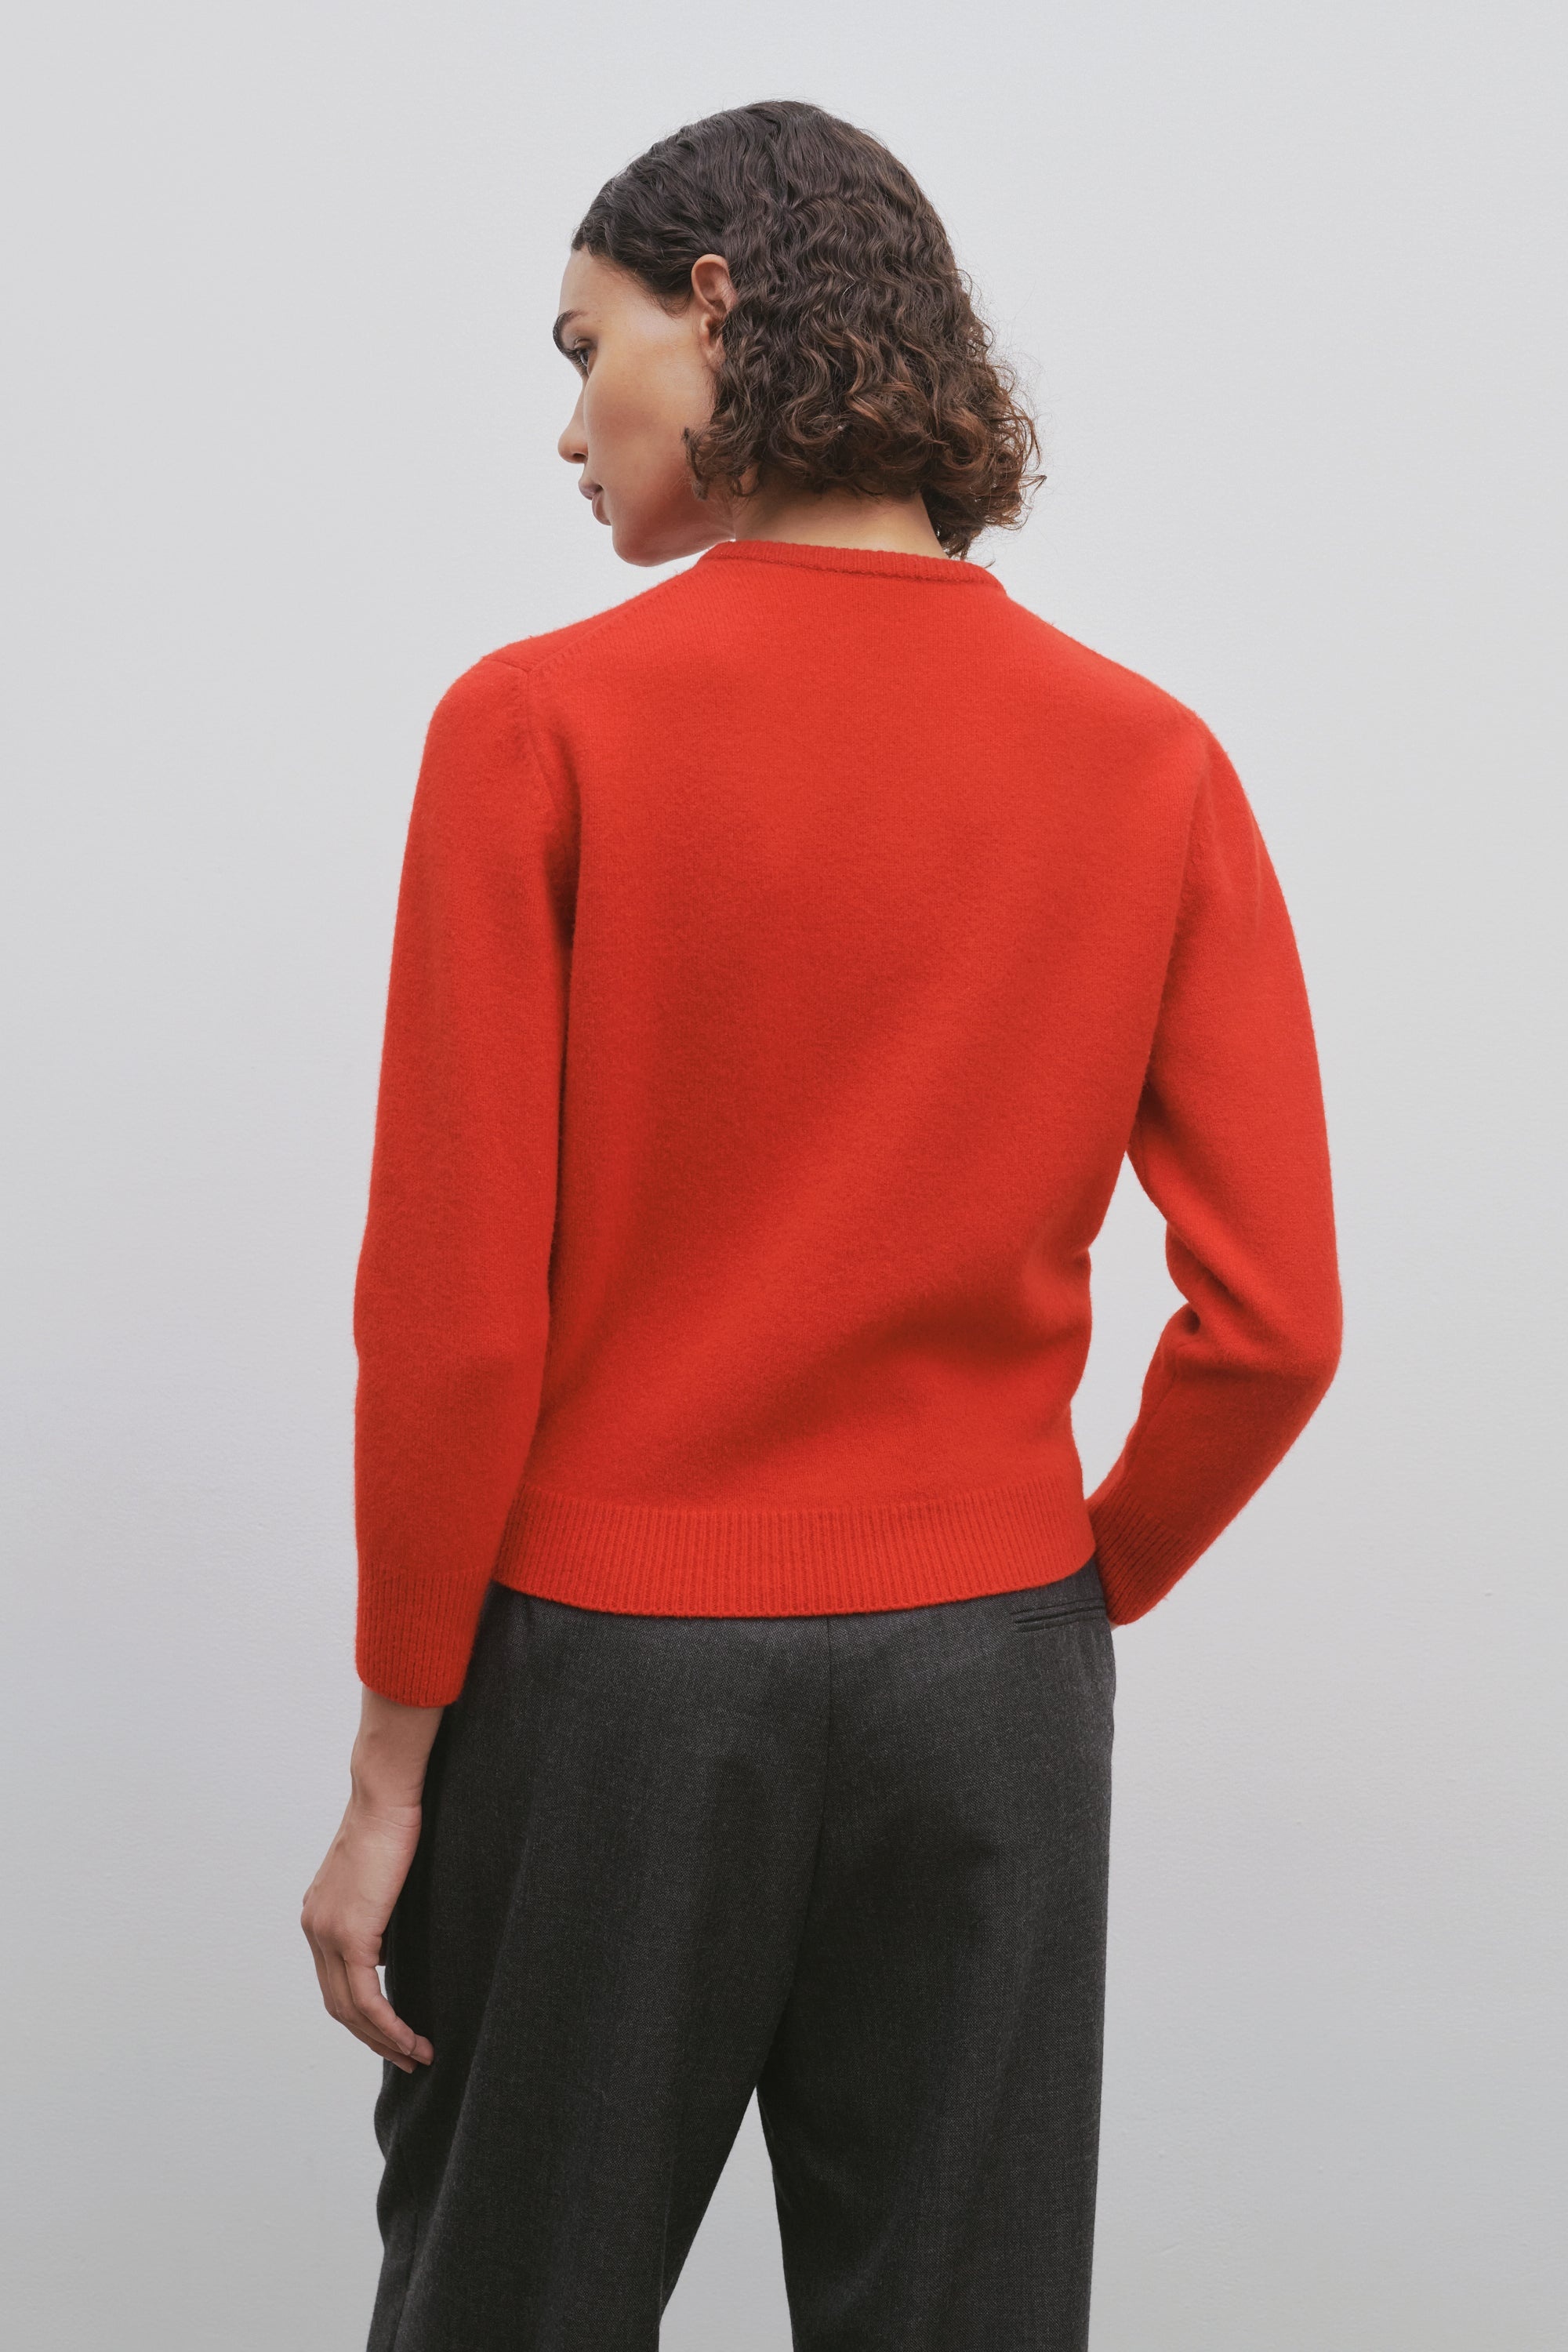 Enid Top in Merino Wool and Cashmere - 4